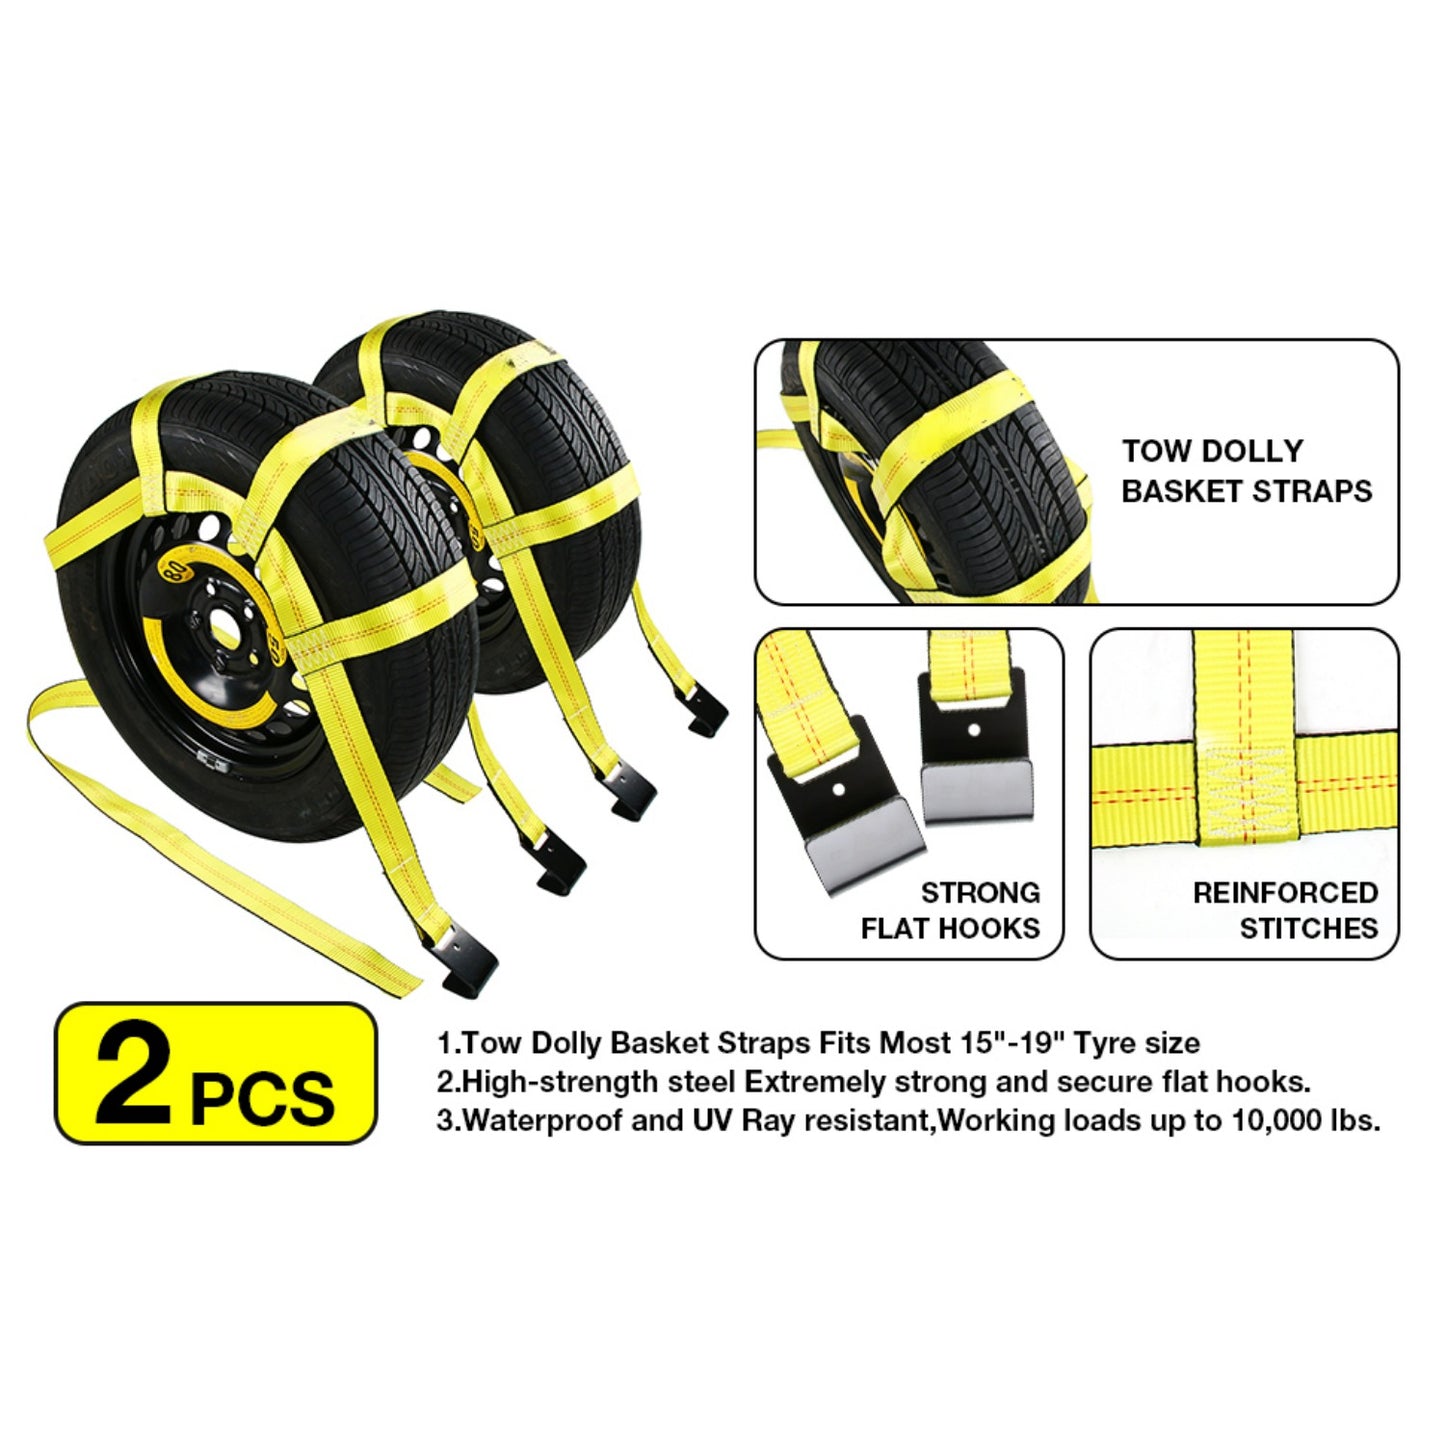 Hemdre Tow Dolly Basket Straps with Flat Hook-2 Pack,Tow Dolly Strap, Universal Vehicle Car Dolly Straps Accessories